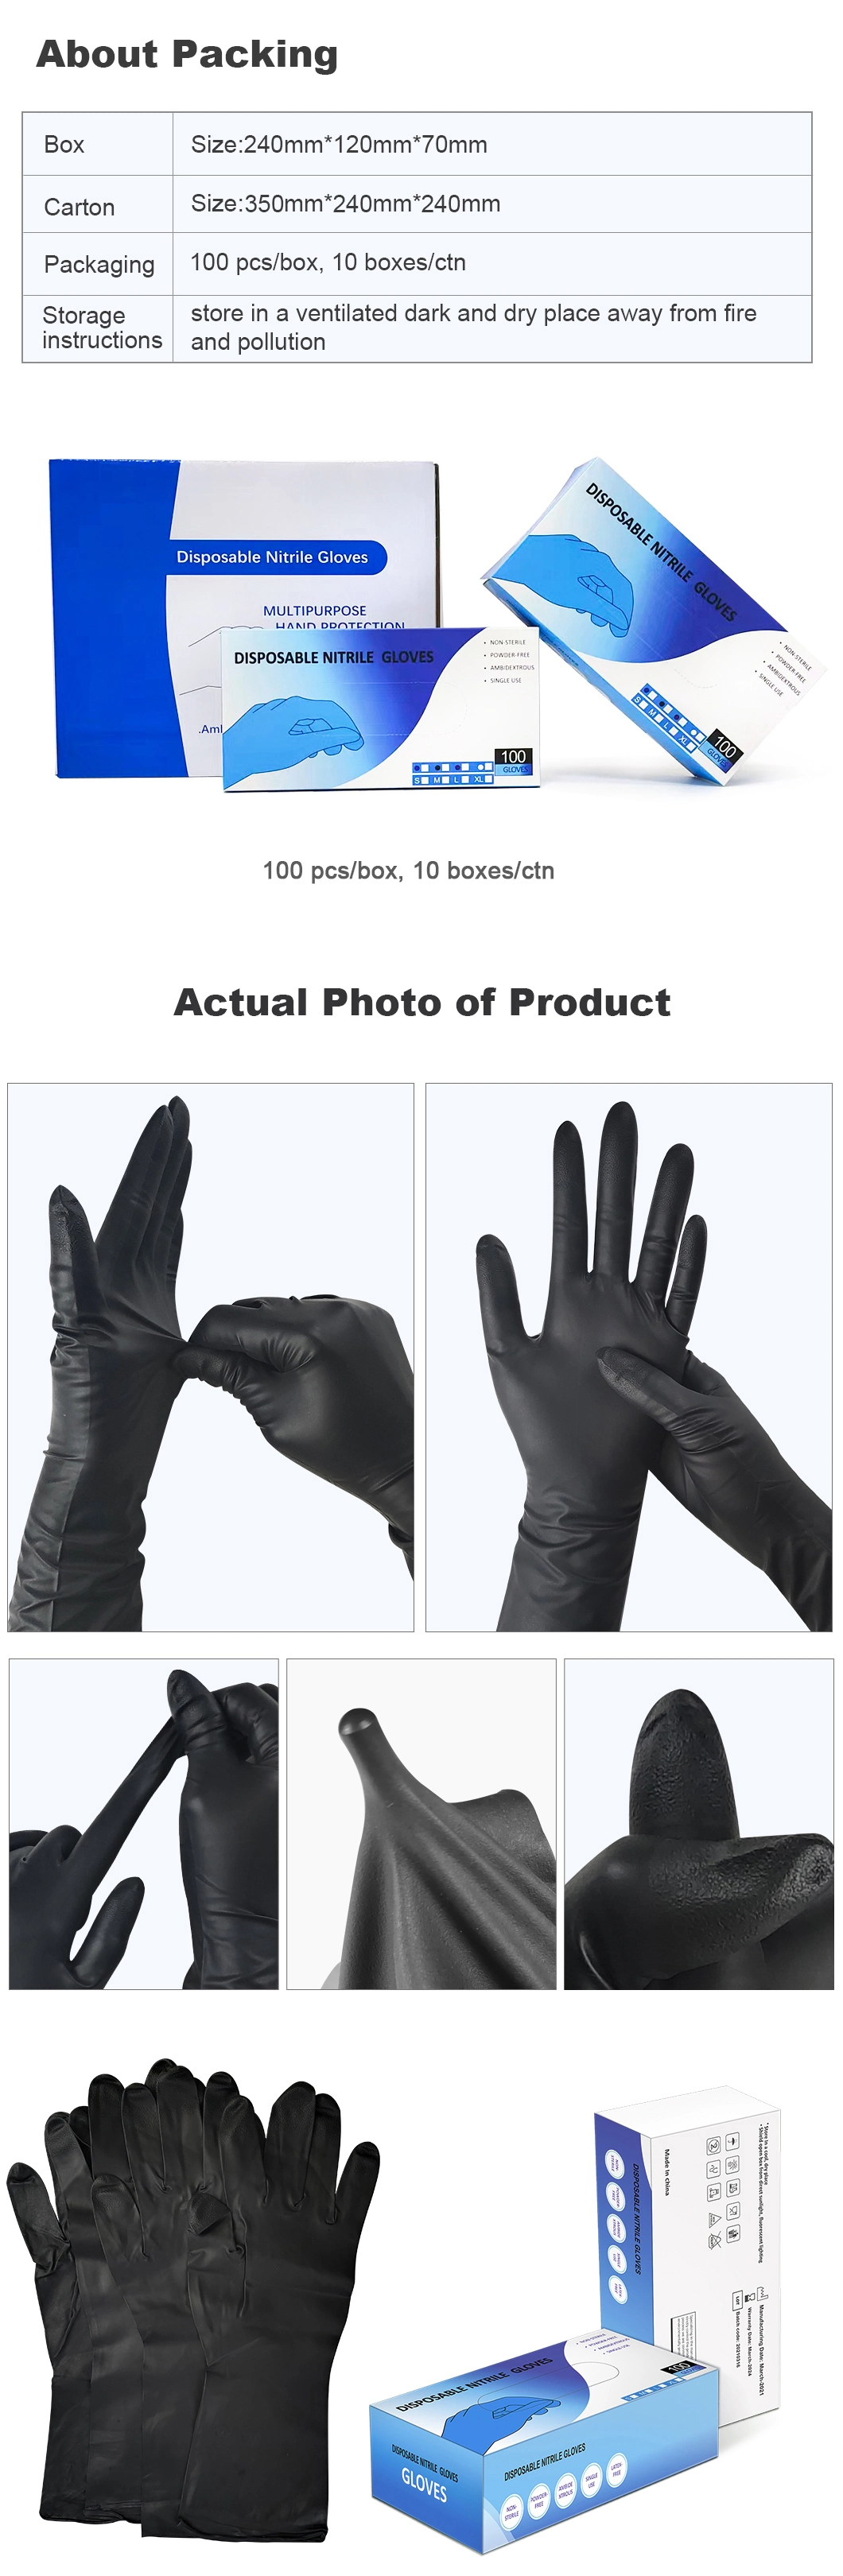 Gusiie 12-Inch Long Glove, Disposable Black Powder Free Chemical Rubber Glove, Safety Nitrile Gloves